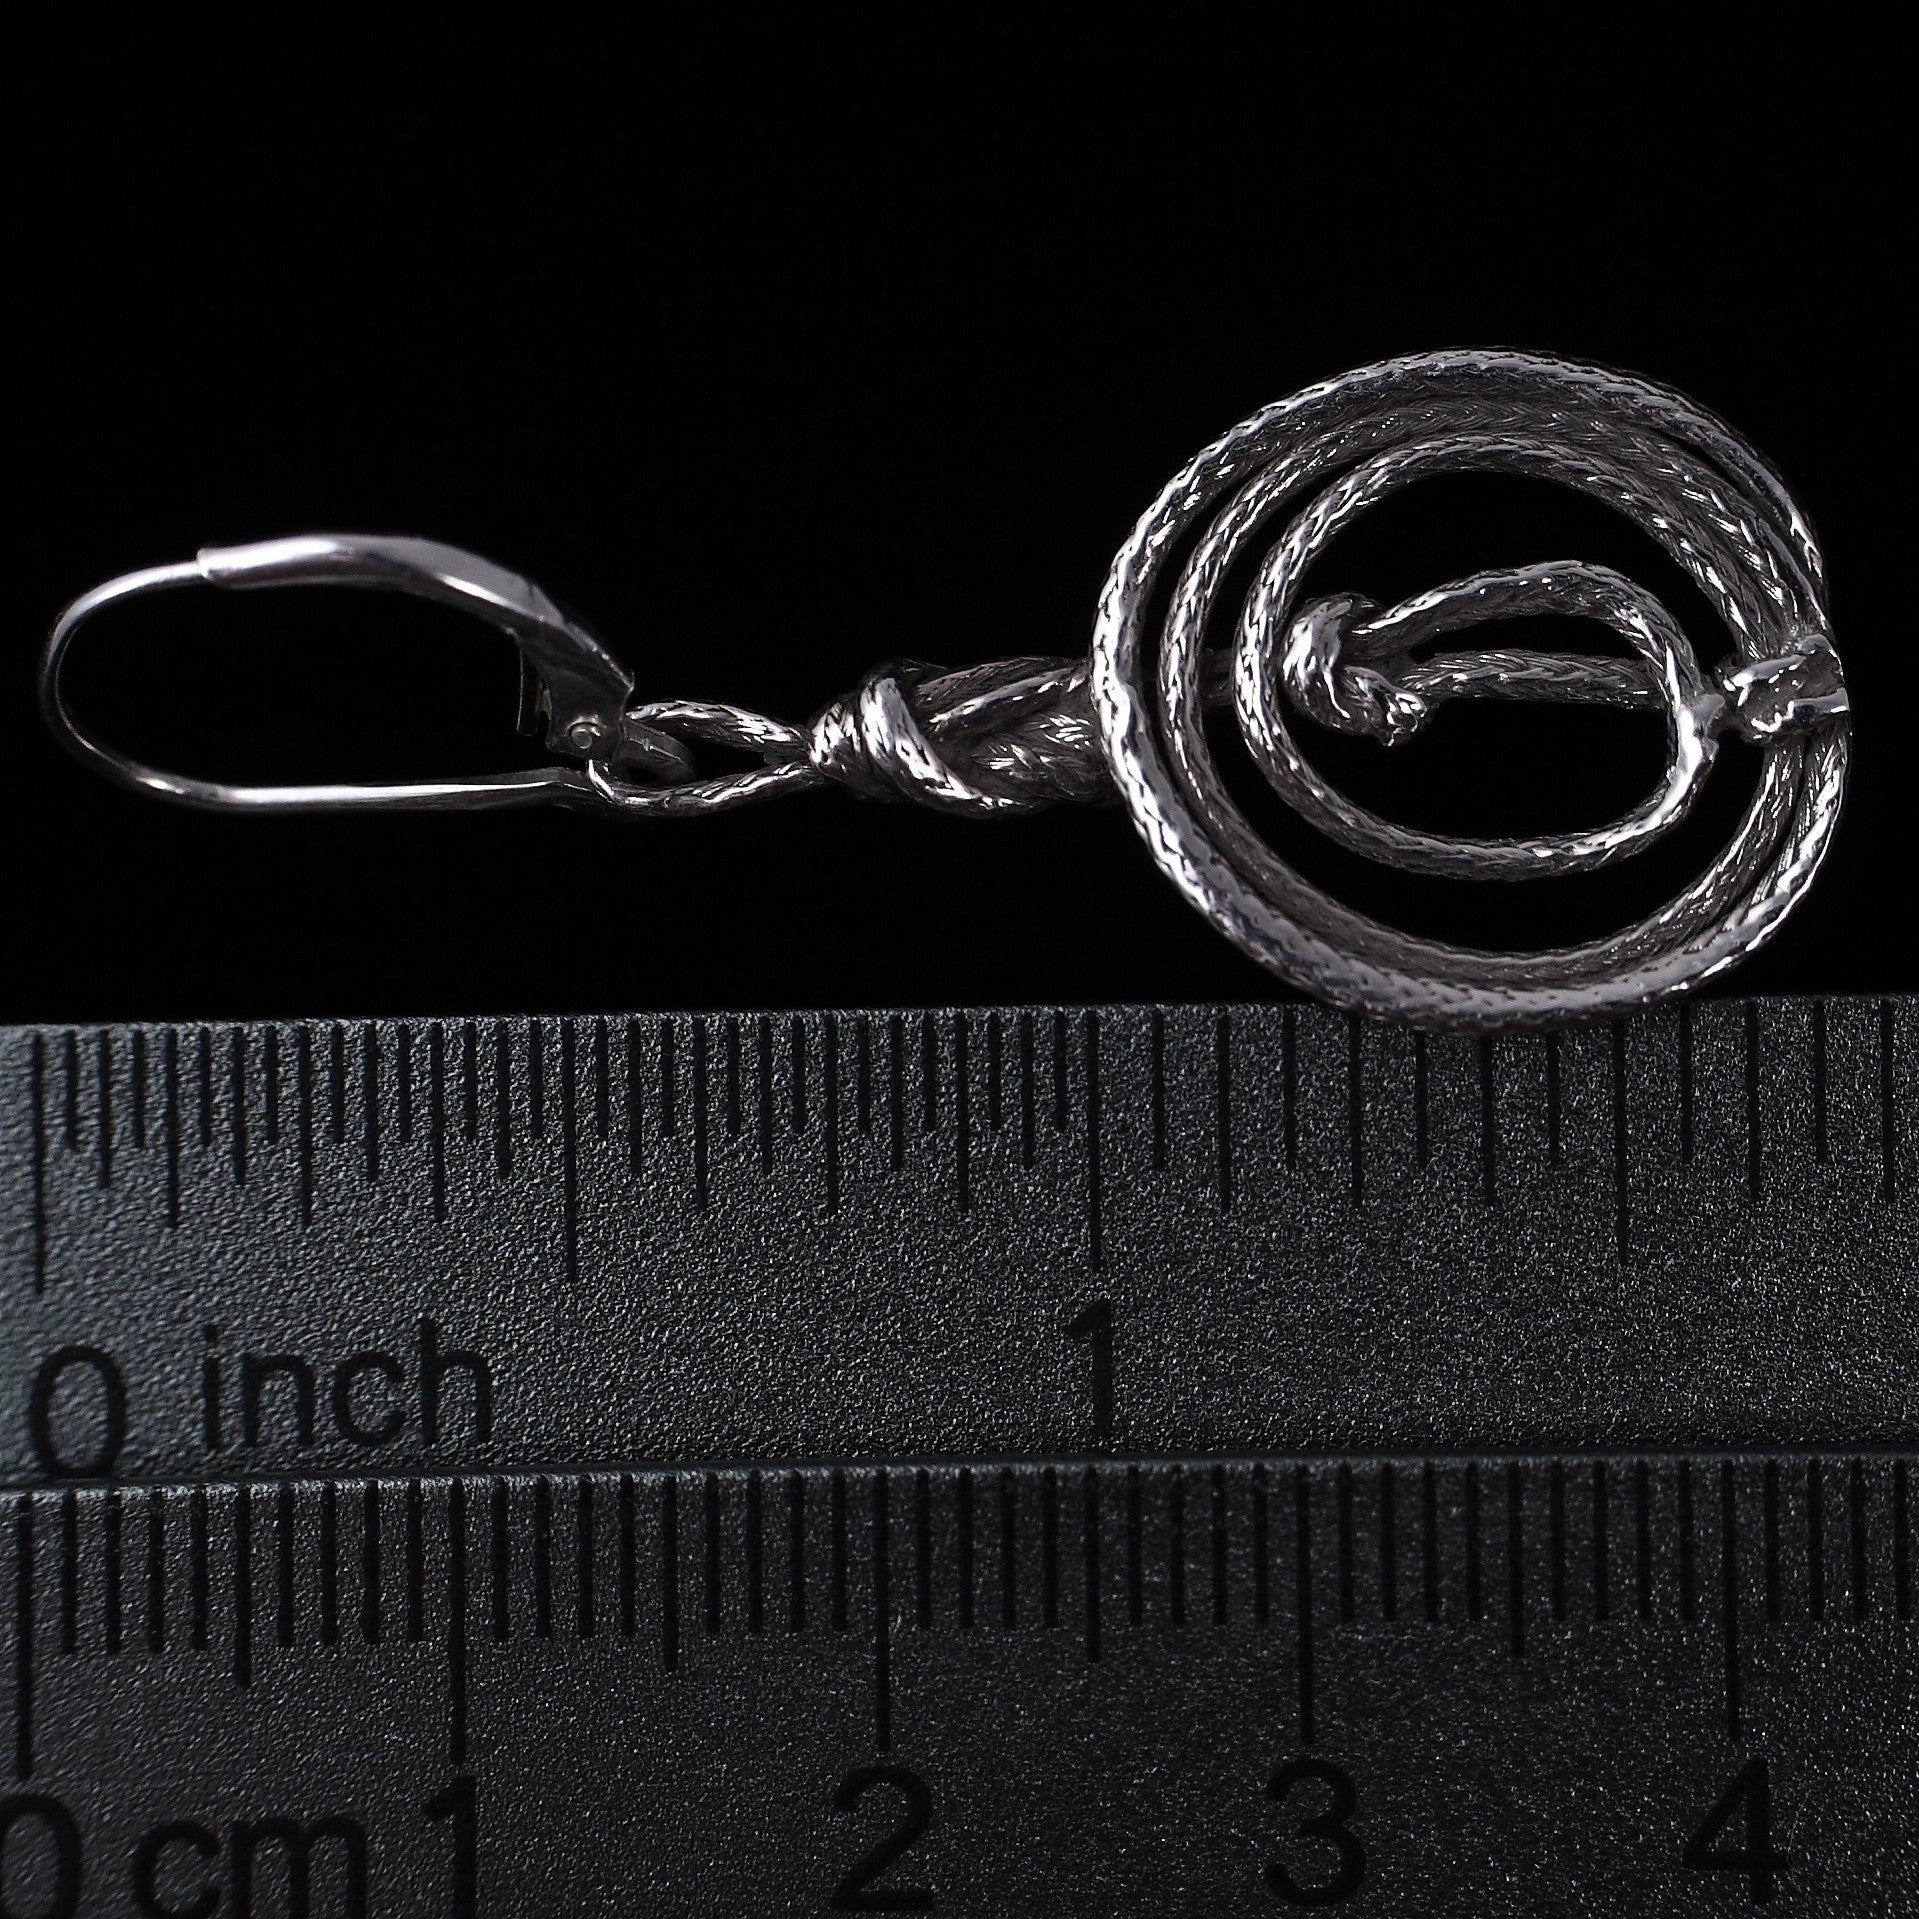 Climbing rope flat coil earring in solid sterling silver - measurements and detail